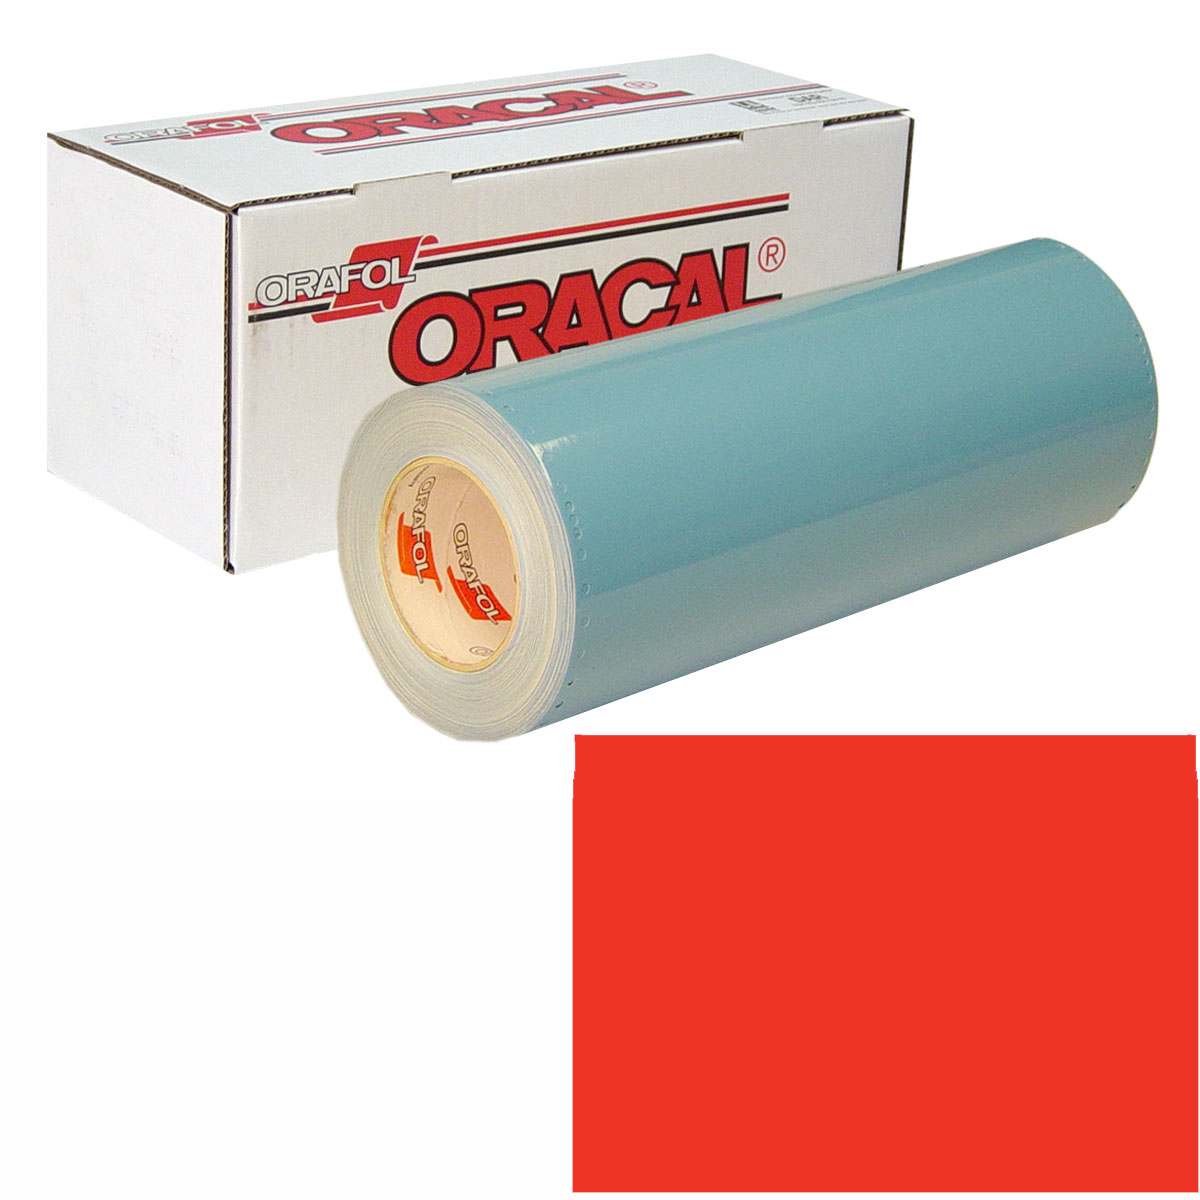 ORACAL 951 30in X 50yd 028 Cardinal Red